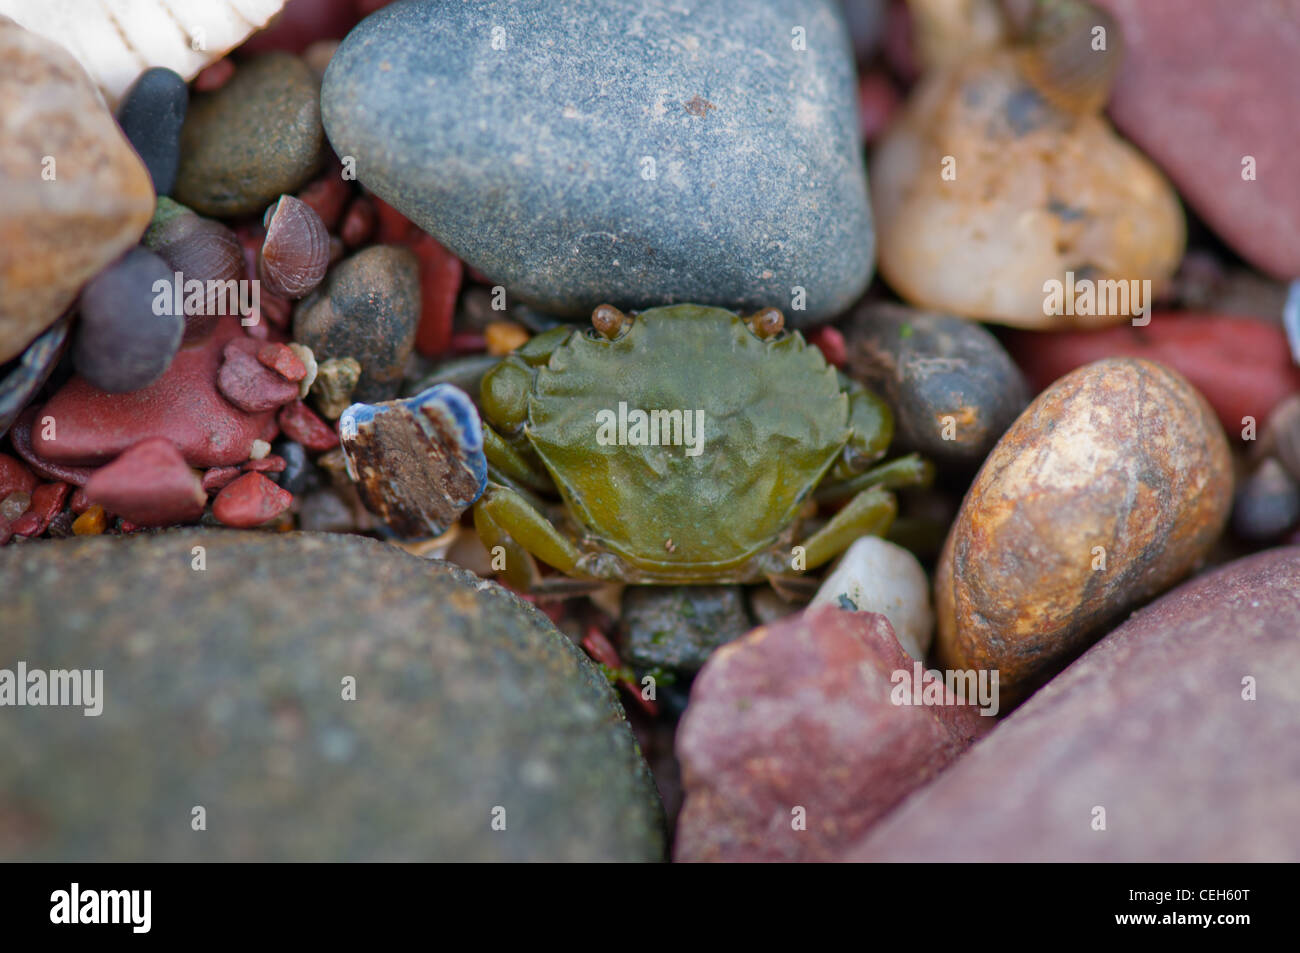 Edible crab in the rocks Stock Photo